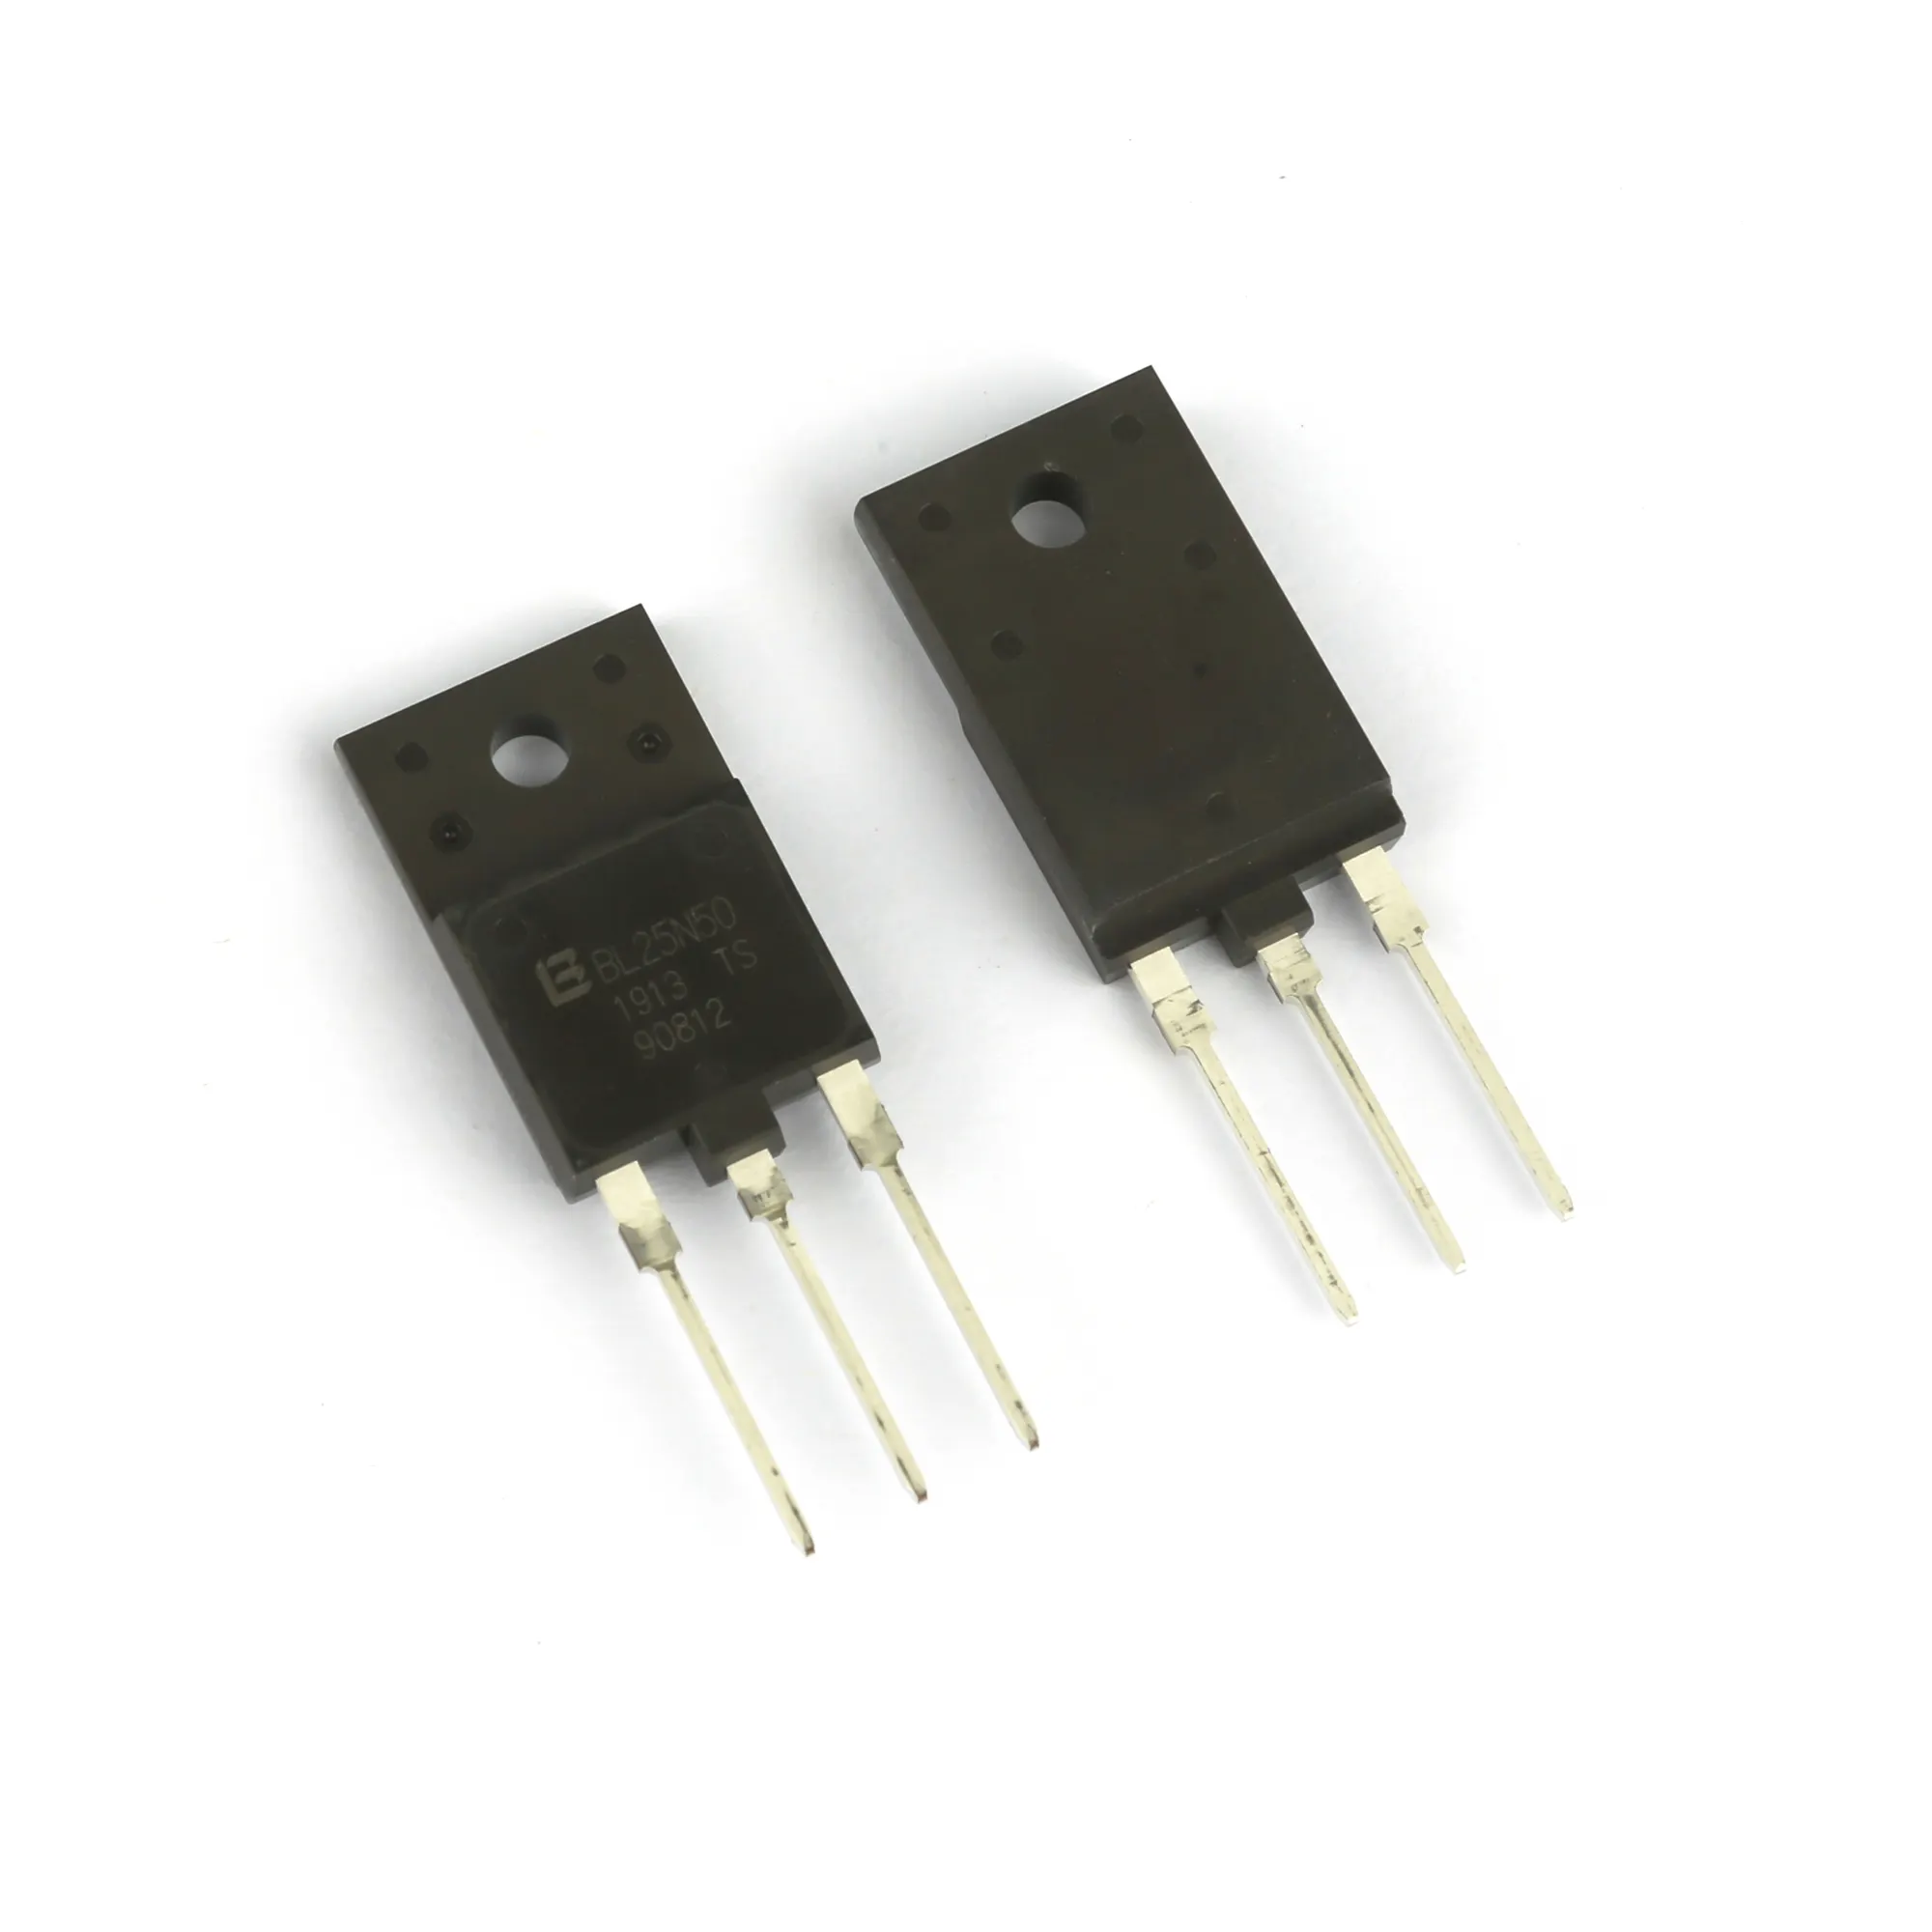 BL25N50-F 500V 25A 25N50 TO-247 N-channel 100% new original MOSFET Transistor for high speed switching